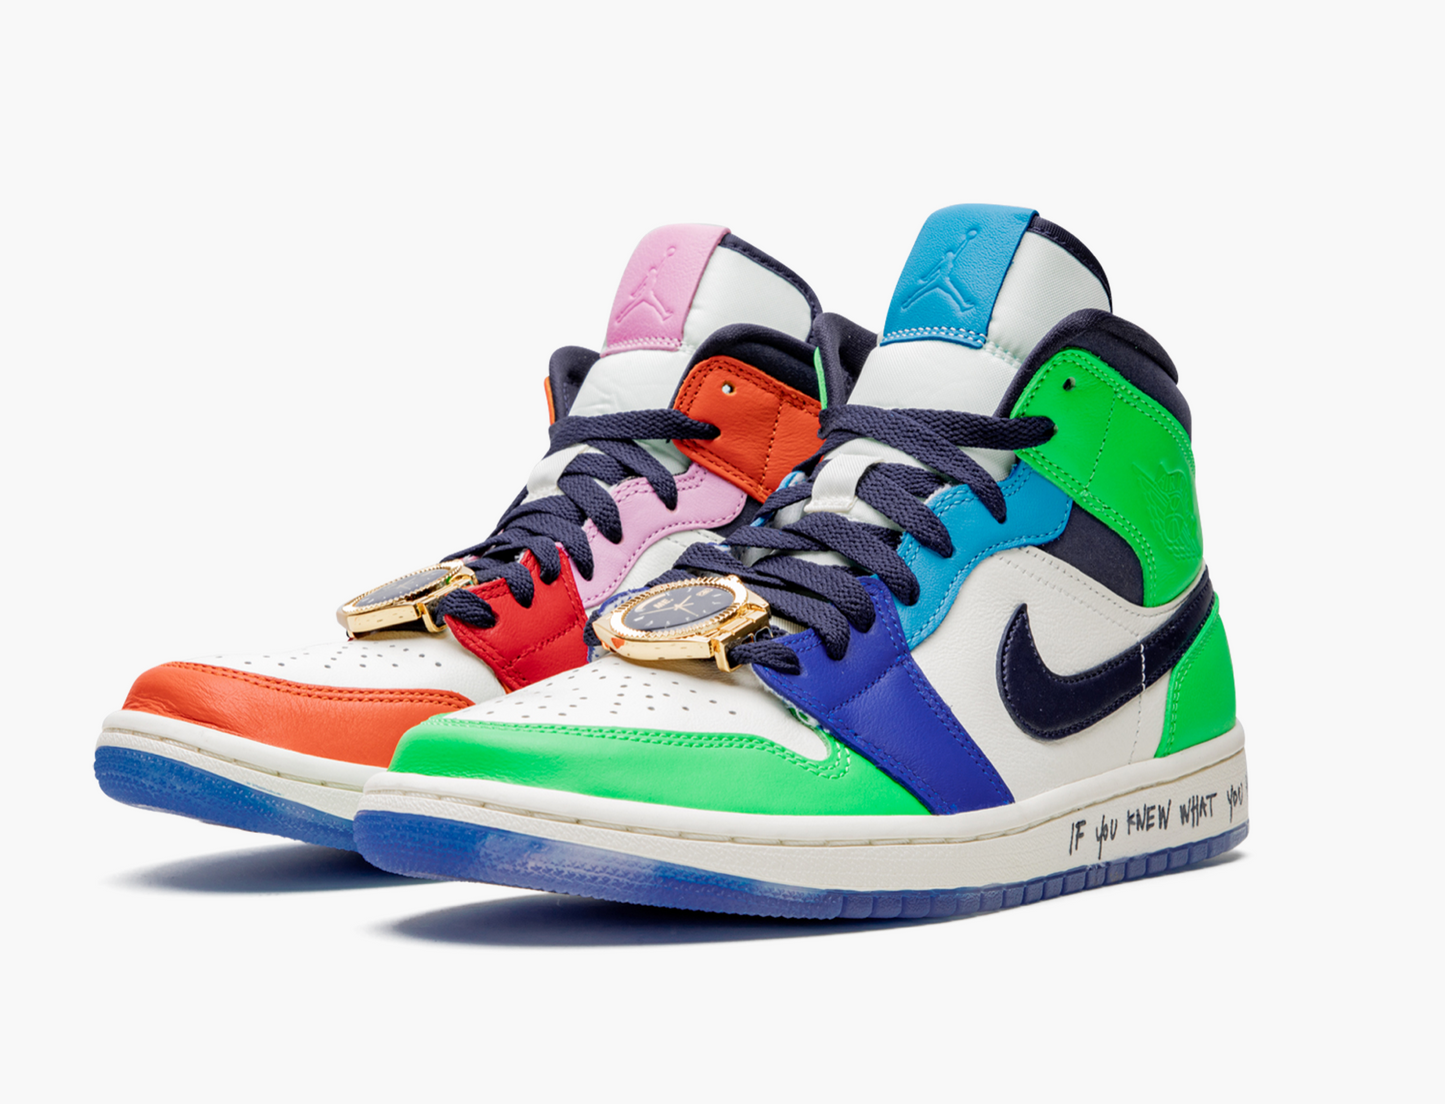 Air Jordan 1 Mid WMNS  “Melody Ehsani - Fearless” - whatever on 